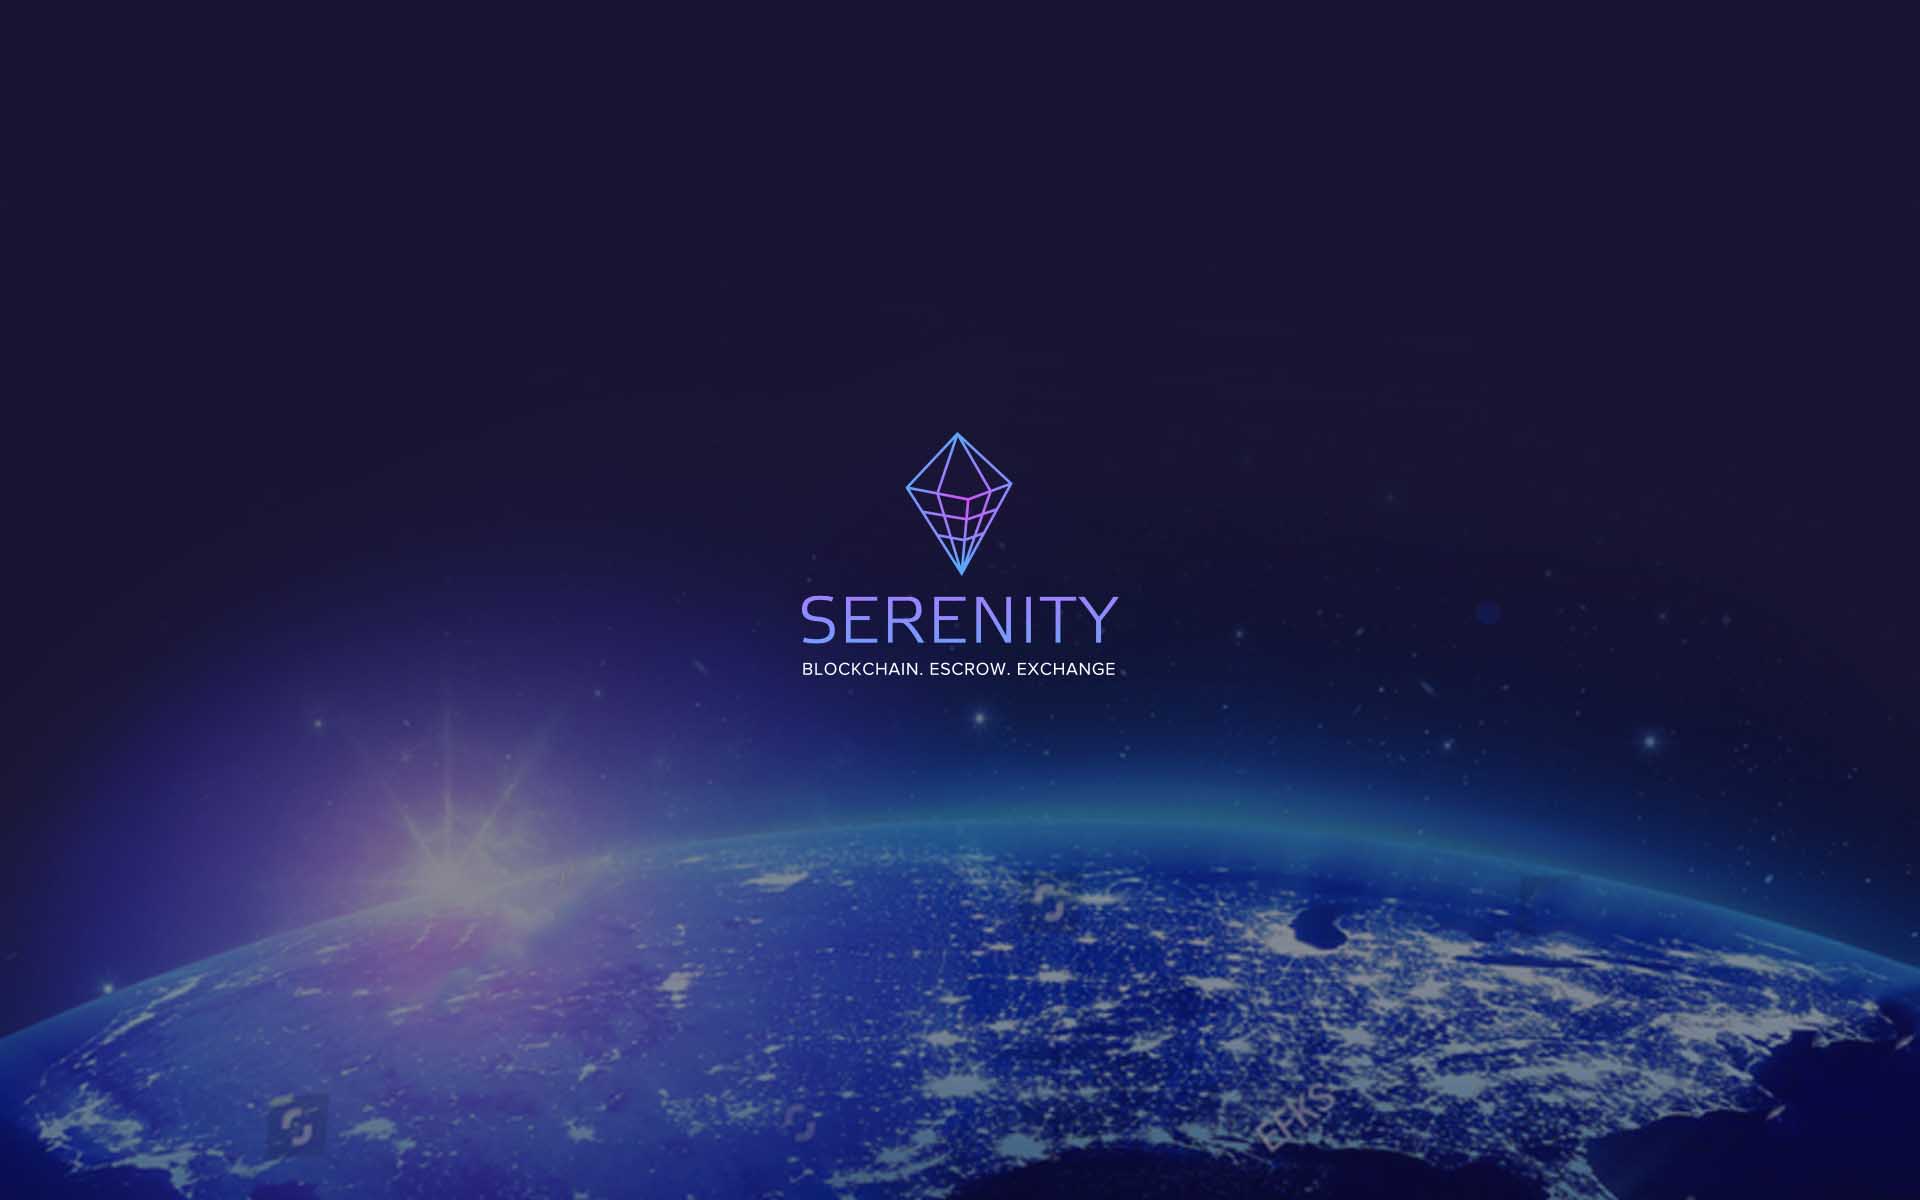 Serenity Project Raises Its First $1,000,000 Two Days After the ICO Launch